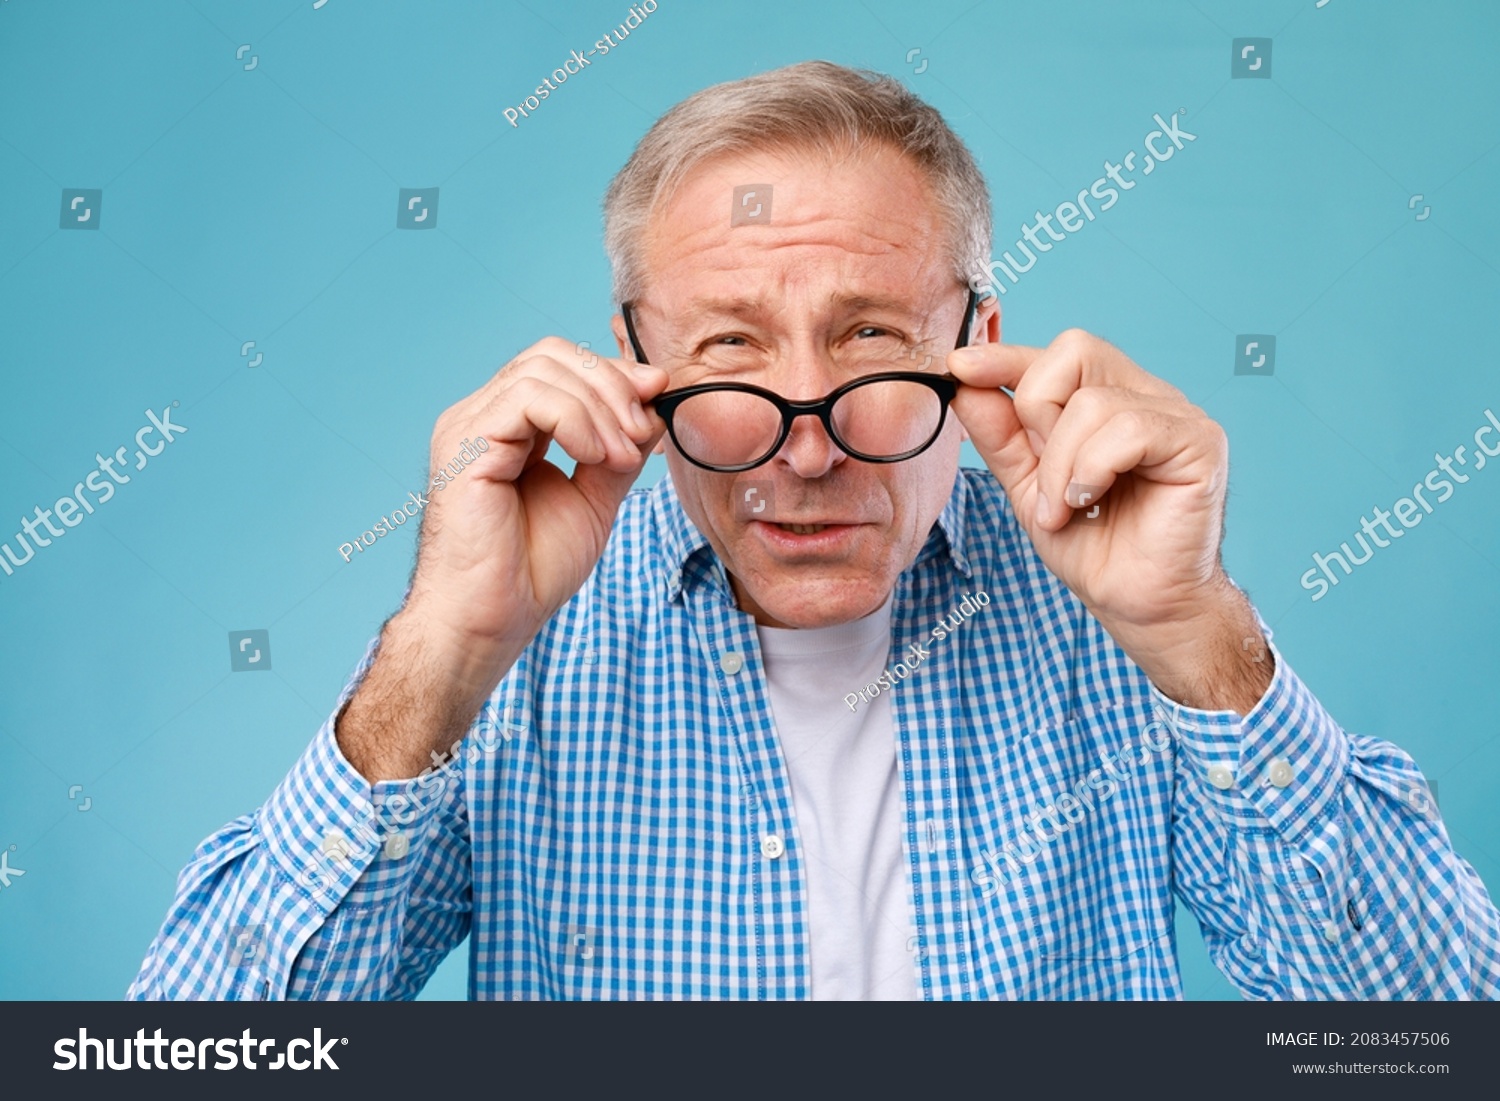 Poor Eyesight. Senior Man Can't See, Squinting Eyes Wearing Glasses Having Problems With Vision, Looking At Camera At Blue Studio. Ophtalmic Issue, Bad Sight In Older Age, Macular Degeneration Concept #2083457506